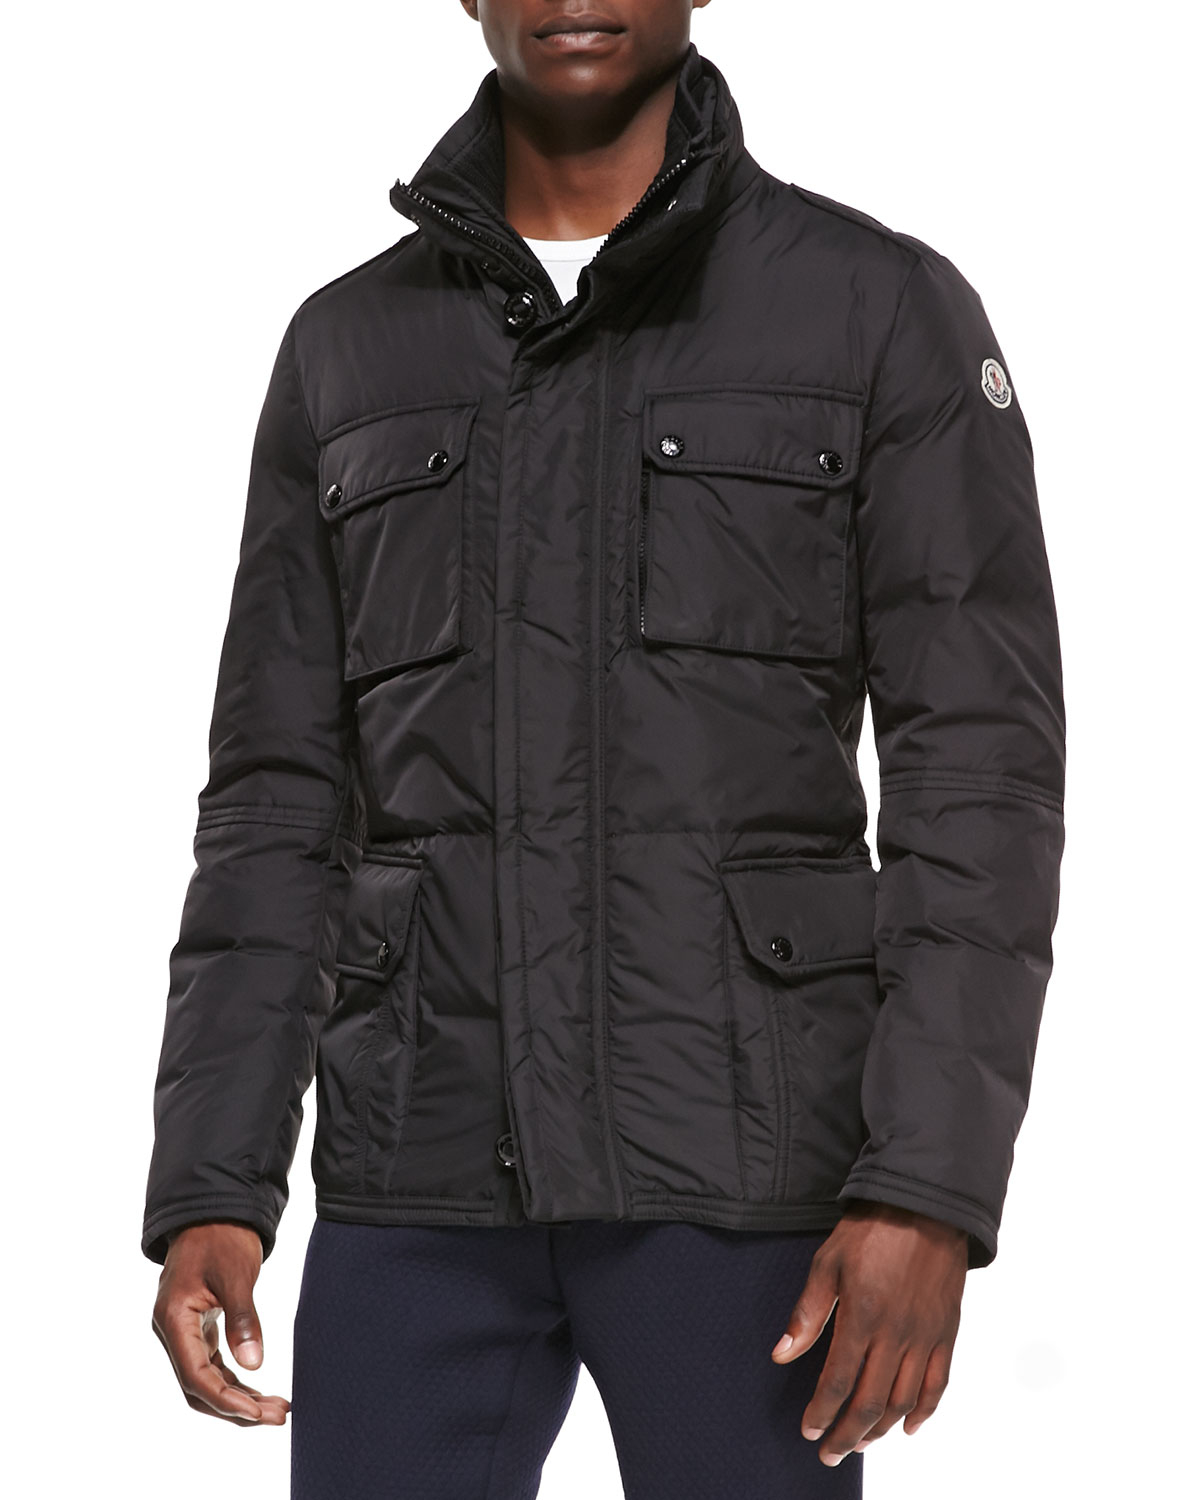 Lyst - Moncler Amazonne Quilted Field Jacket in Black for Men